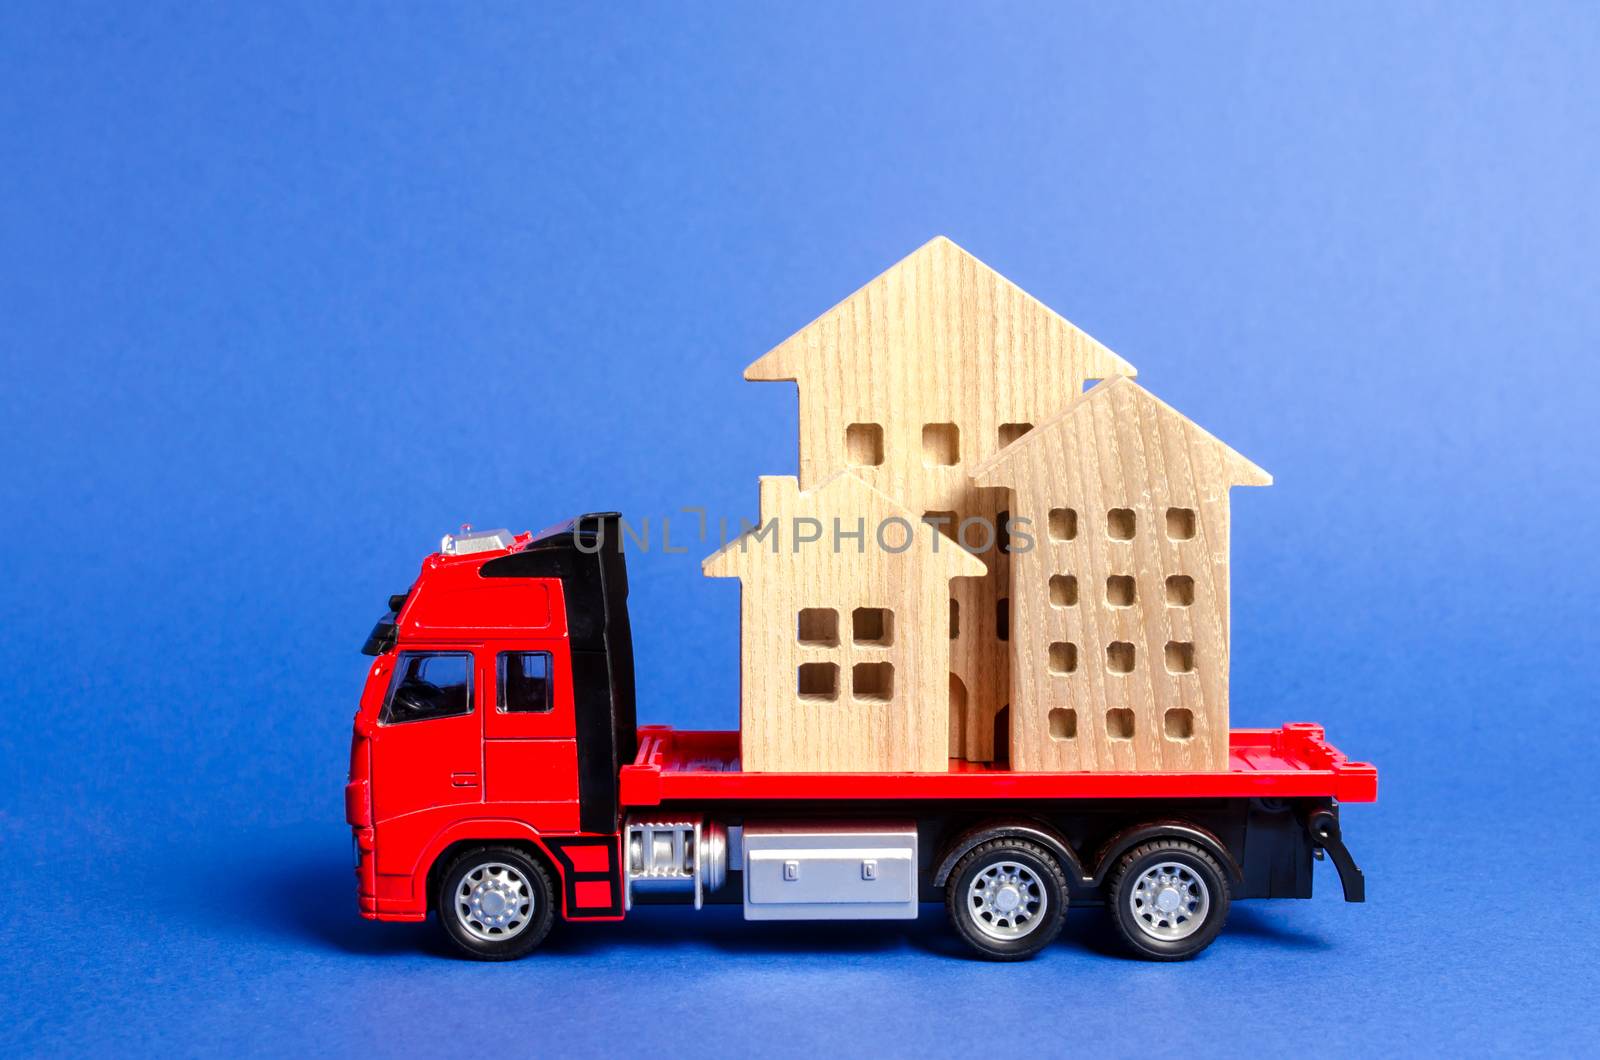 Red truck transports wooden houses. Concept of transportation and cargo shipping, moving company. Construction of new houses and objects. Industry. Logistics and supply. Move entire buildings. by iLixe48